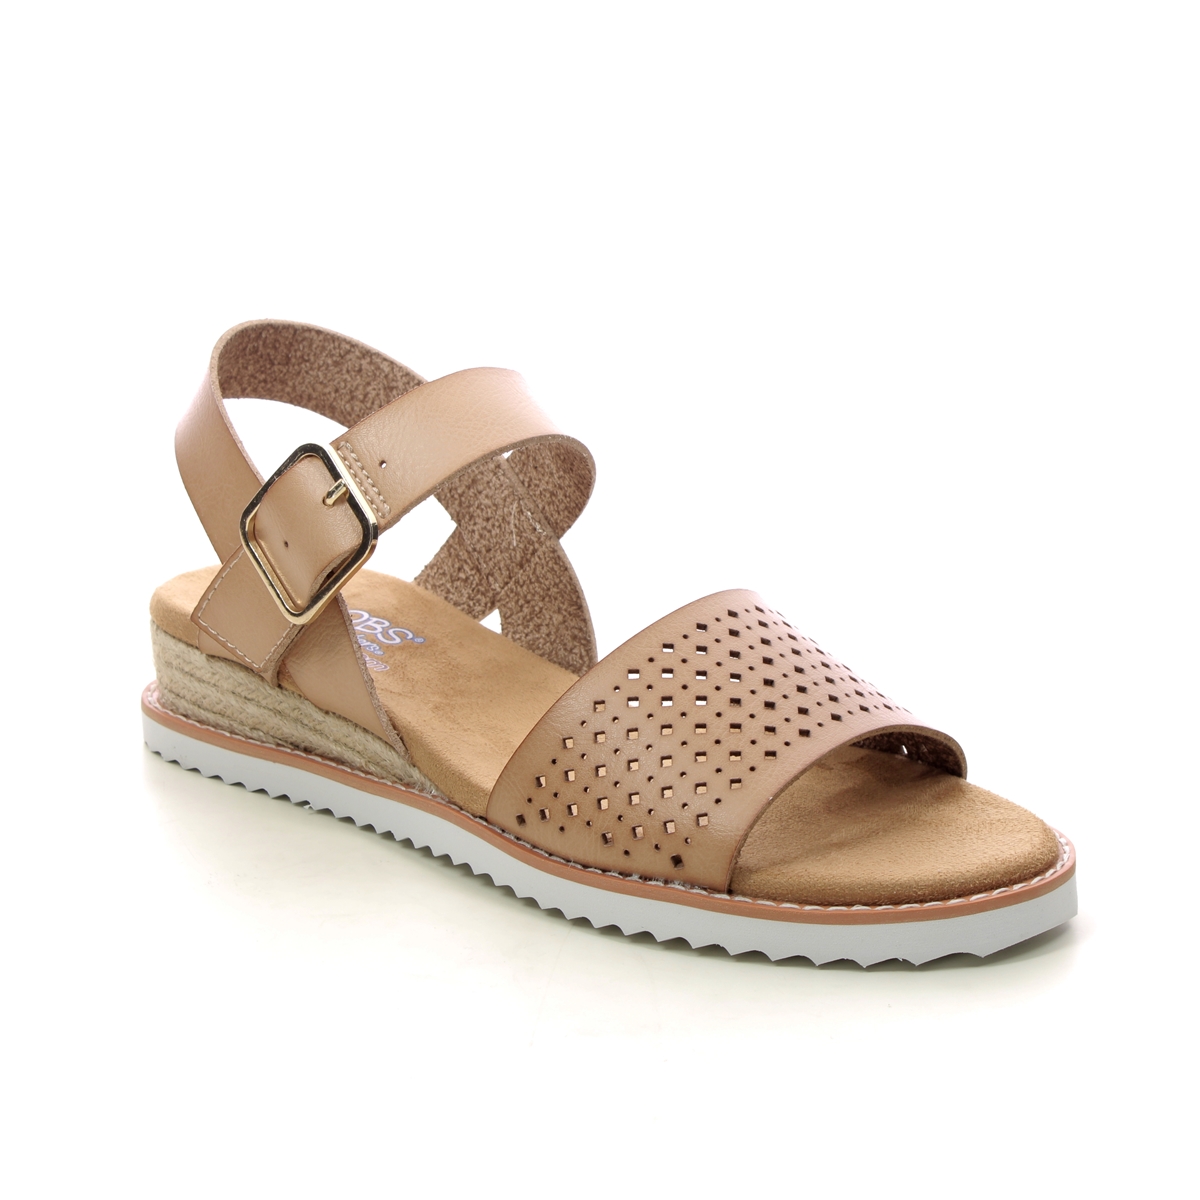 Skechers Bobs Desert NAT Natural Womens Wedge Sandals 114143 in a Plain Man-made in Size 6